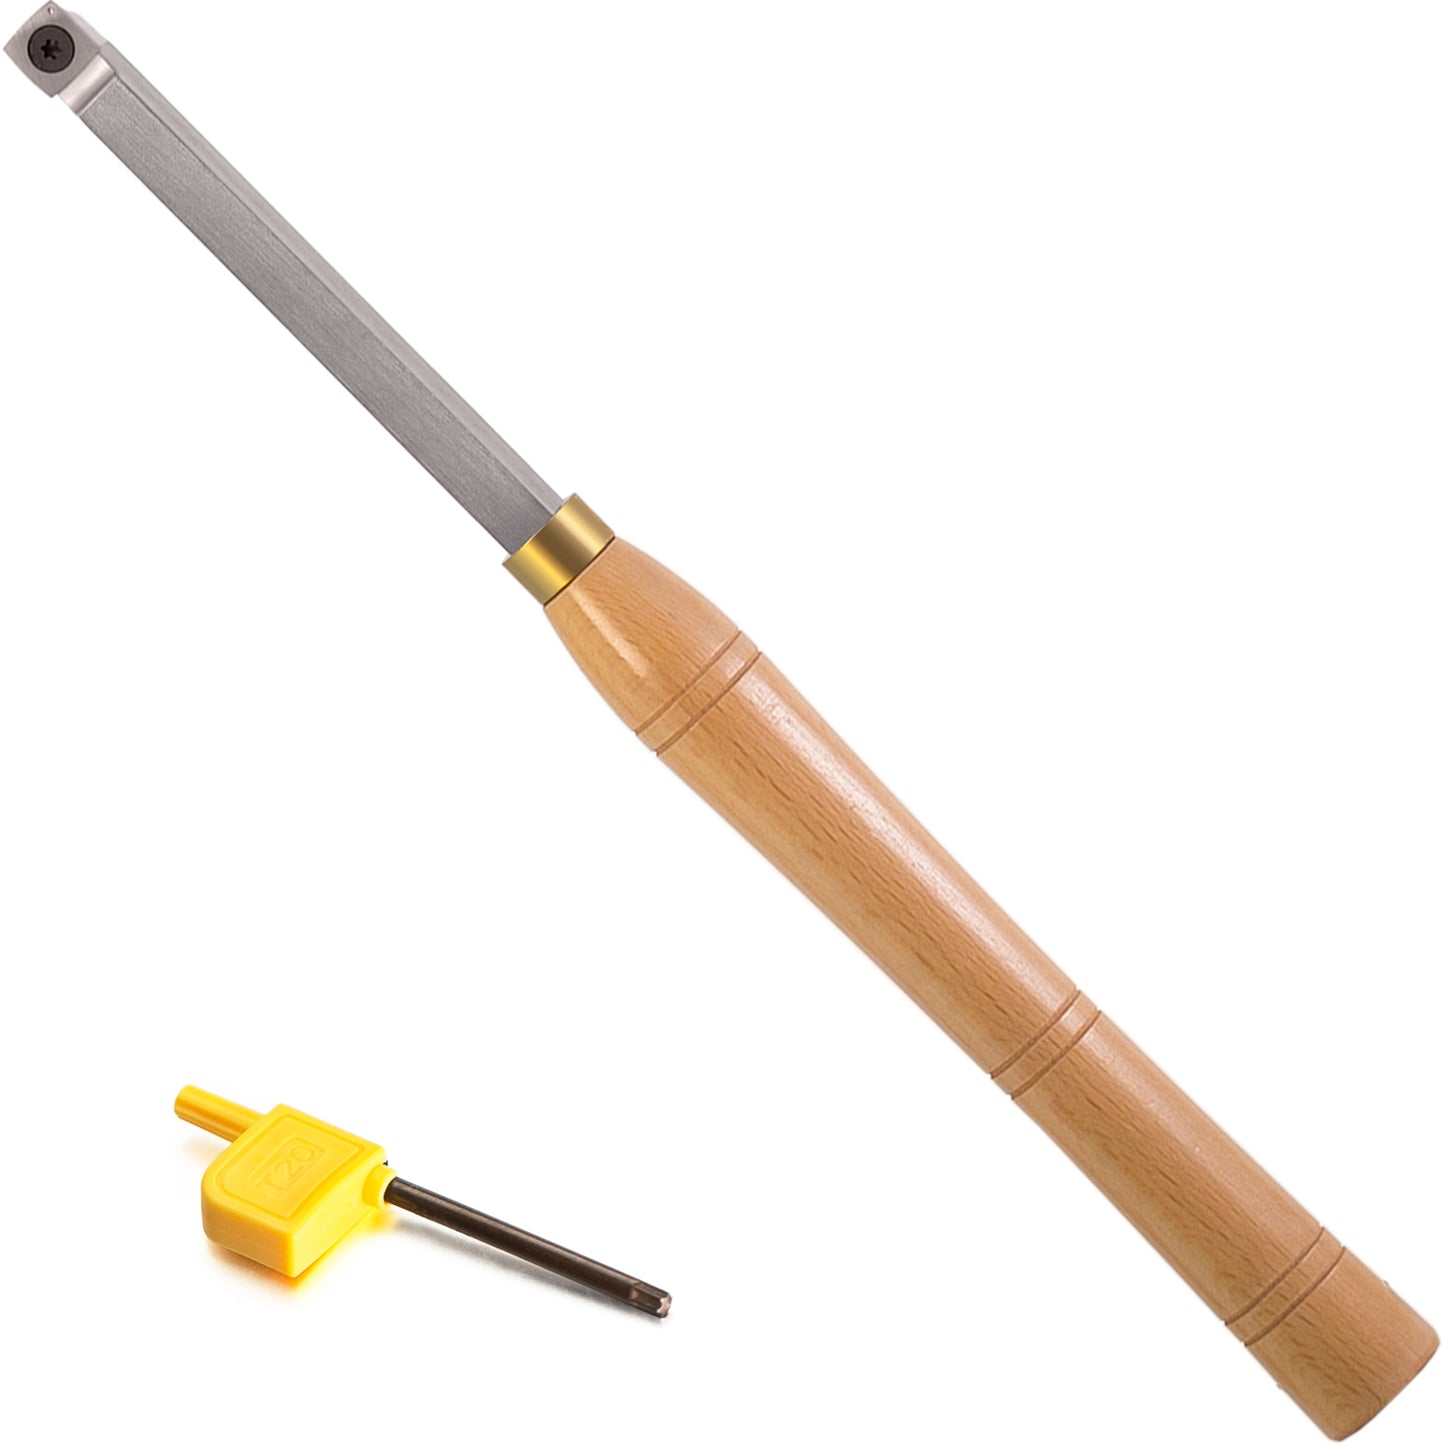 Woodturning Mid Rougher Carbide Tipped 15mm Square Radius Carbide Insert Lathe Tool Bar with Solid Wooden Handle 400mm